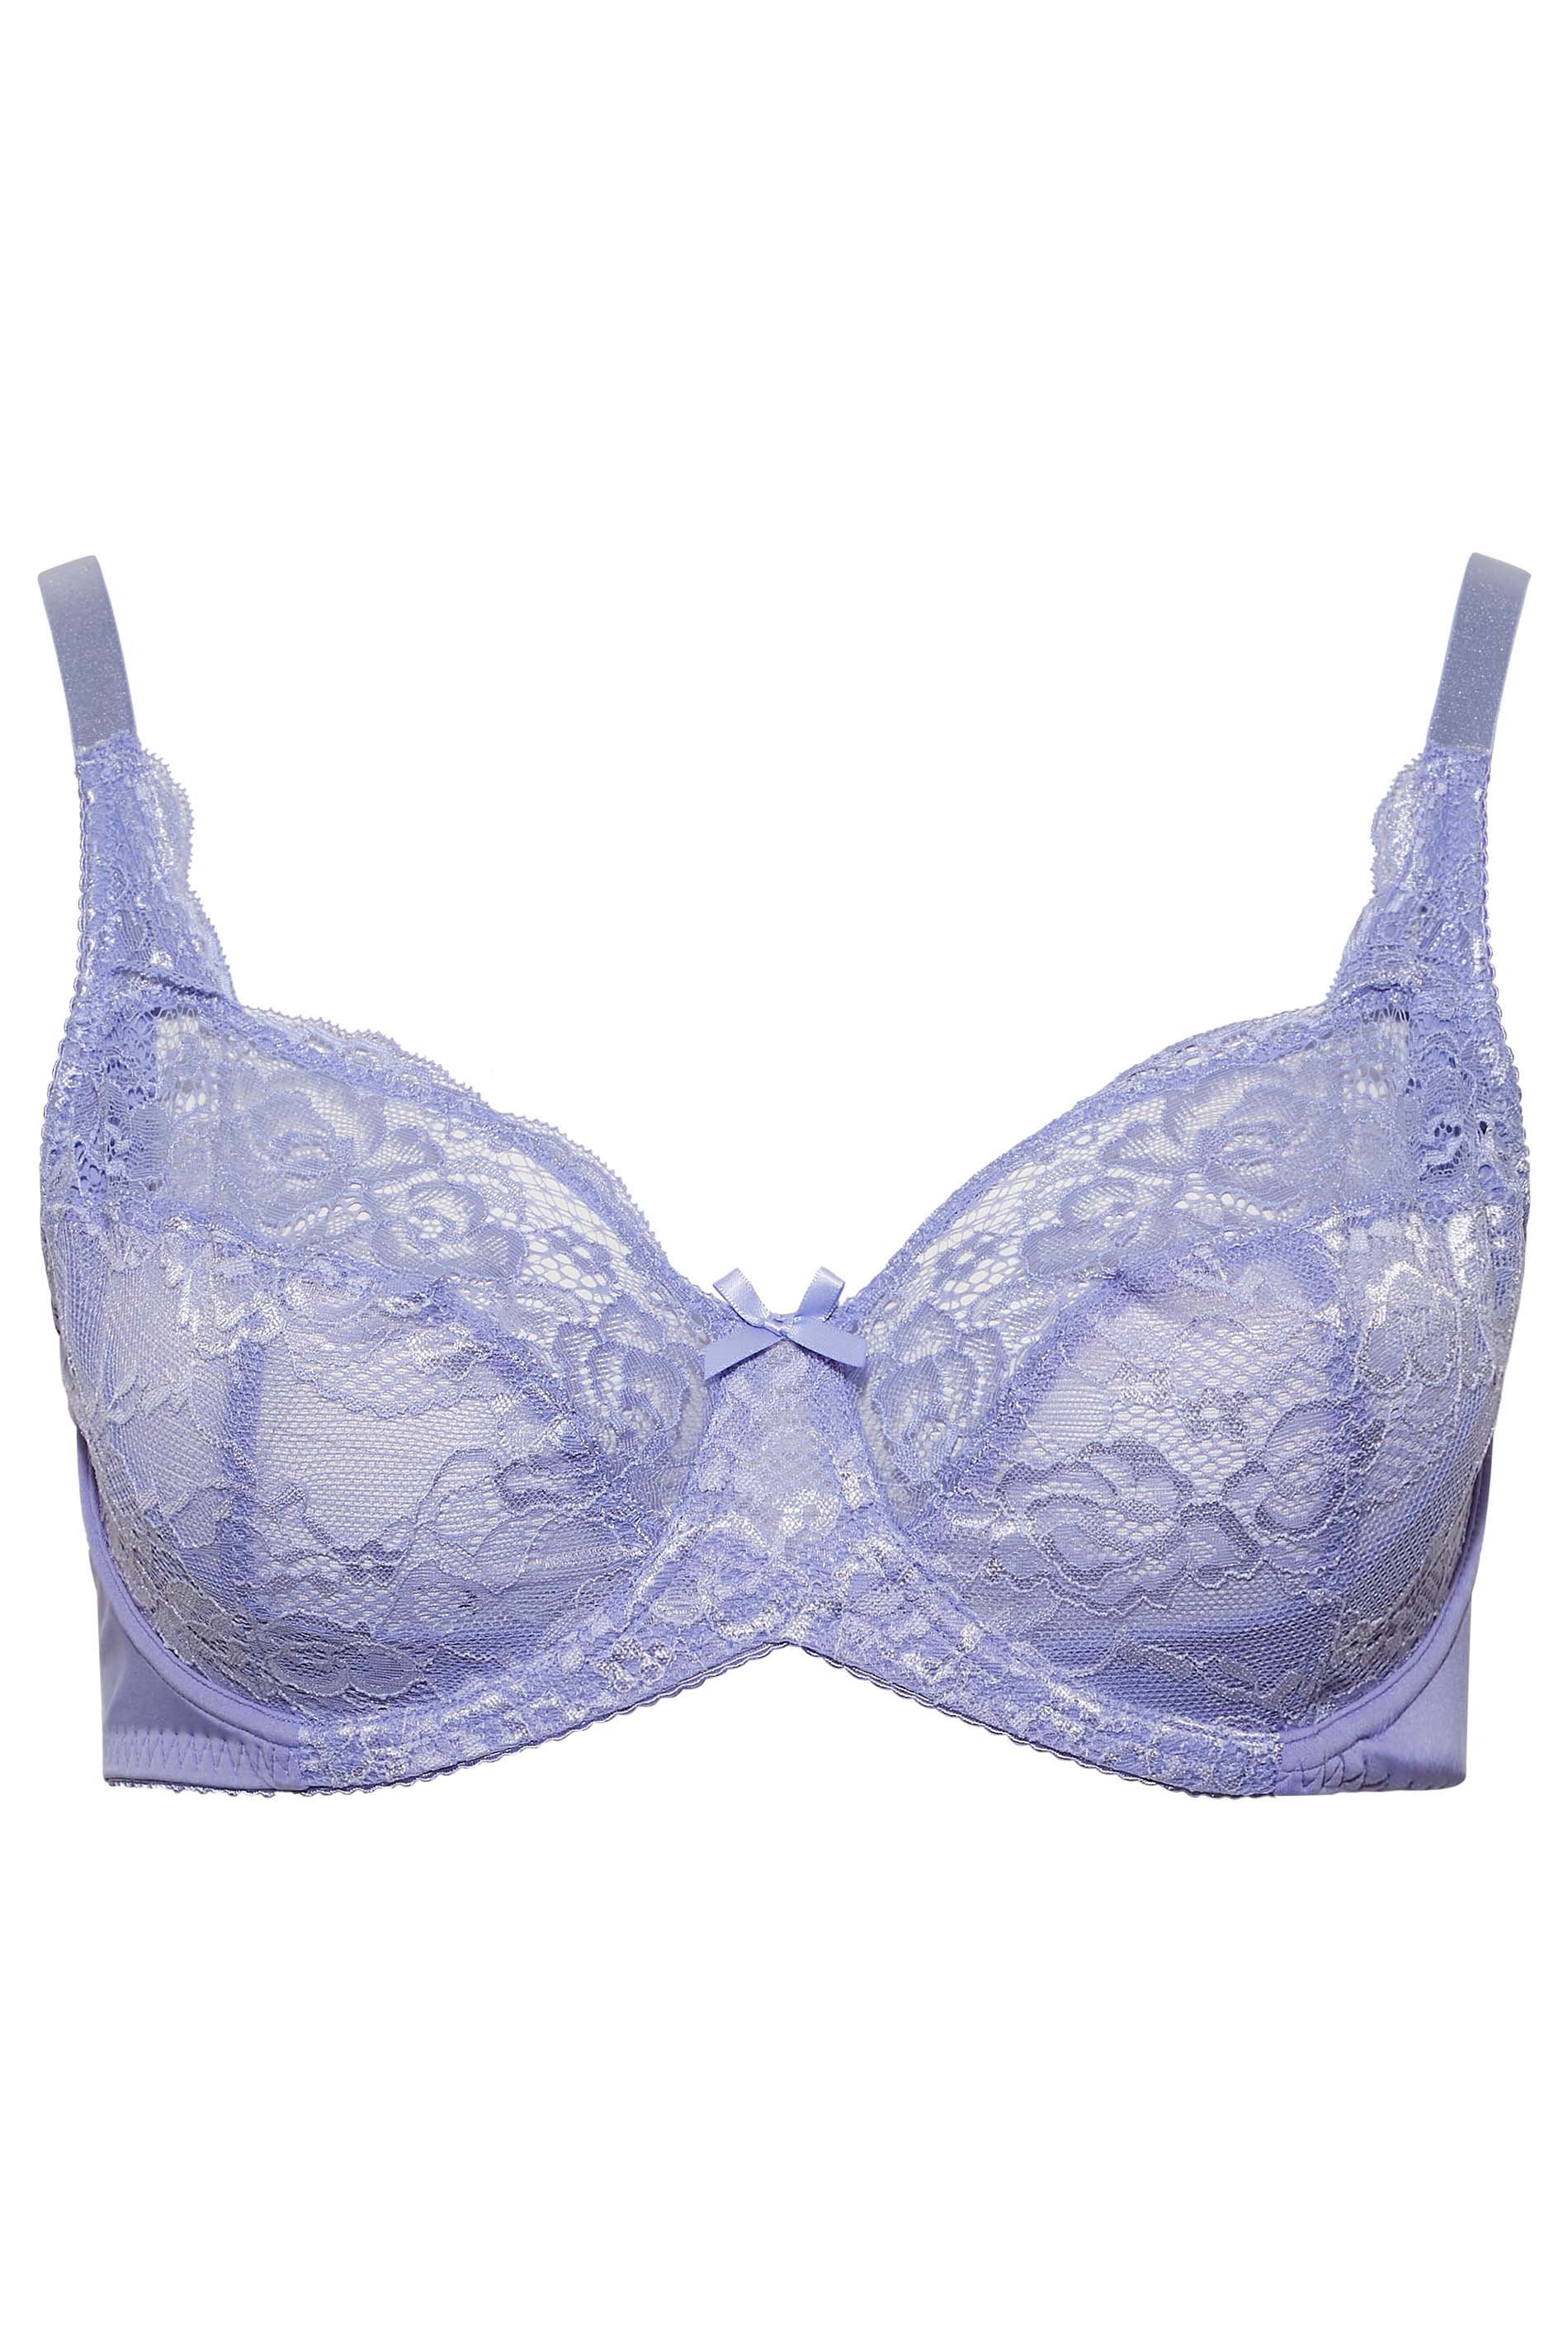 Plus Size Lavender Purple Stretch Lace Non-Padded Underwired